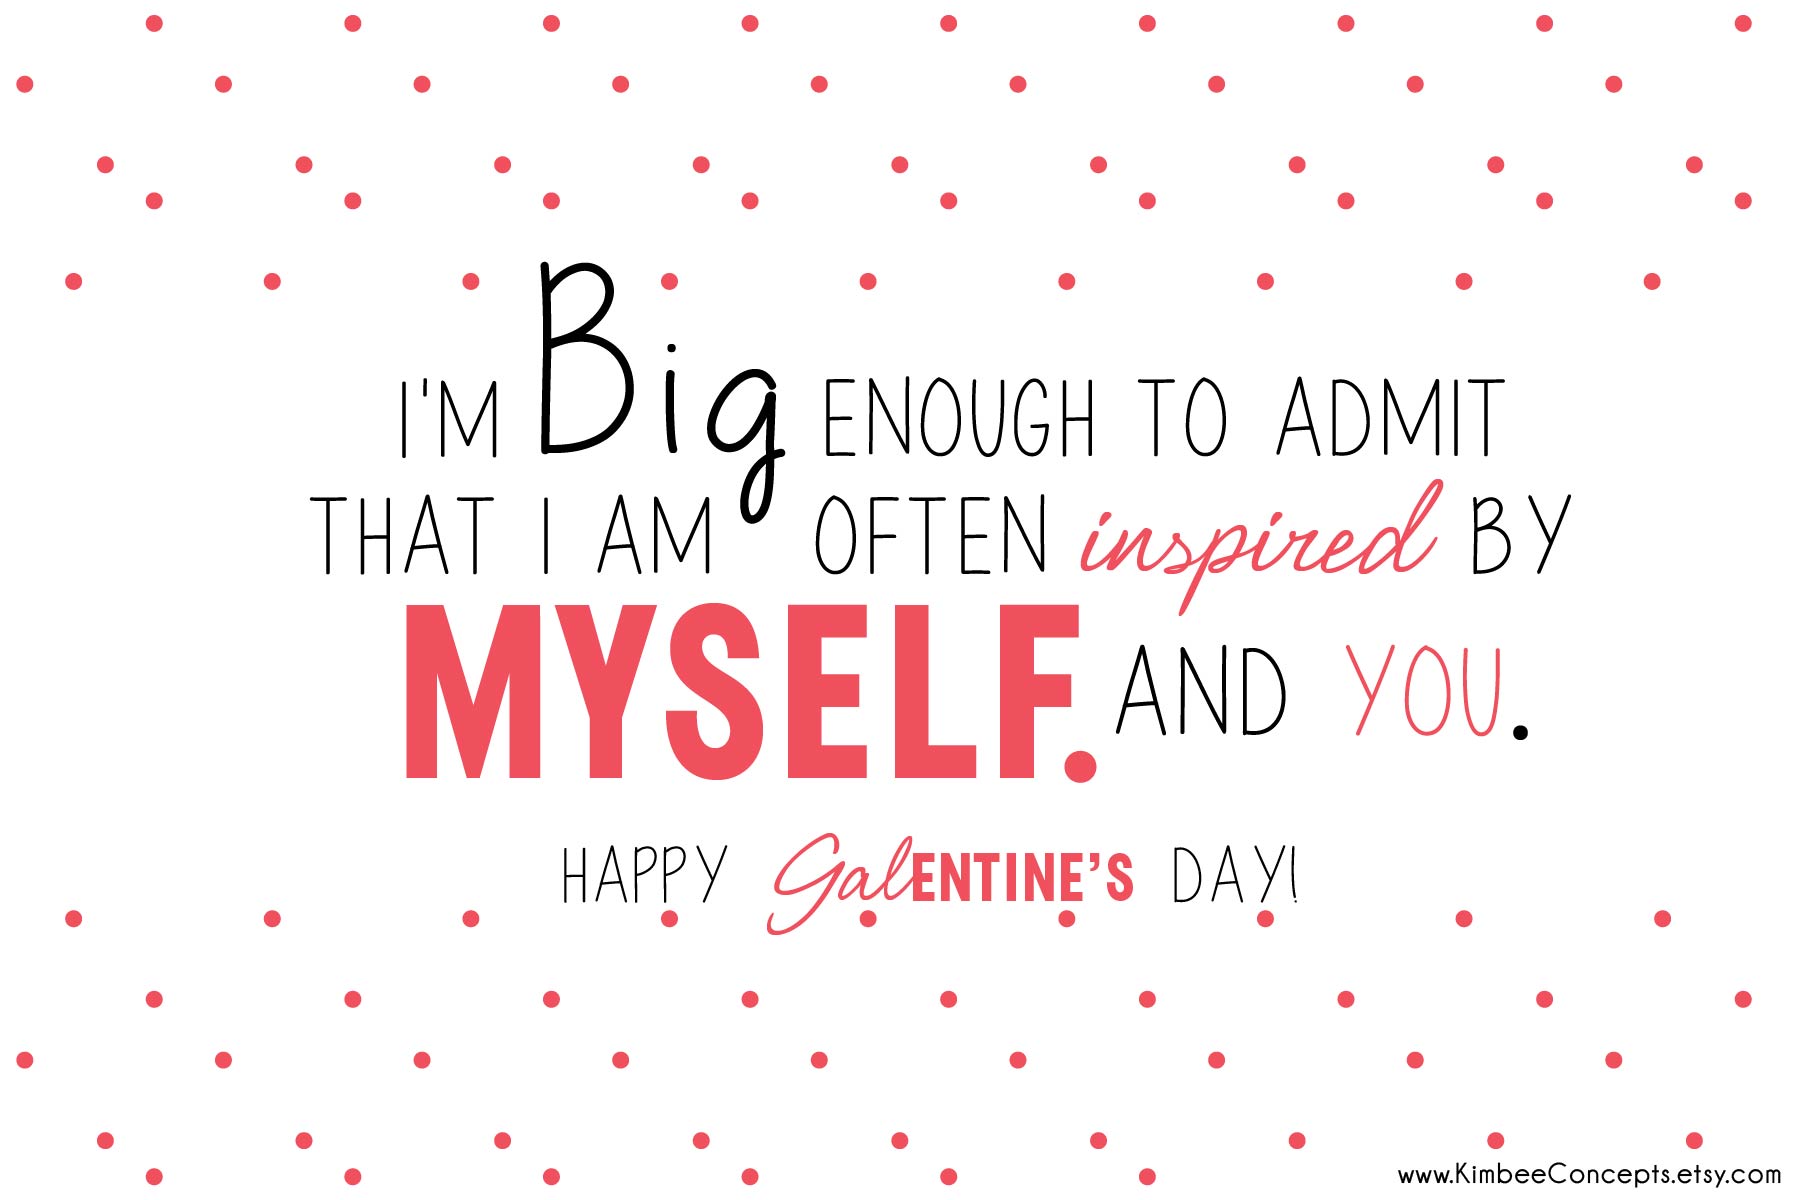 » Free Printable Galentine’s Day Cards For Your Lady Friends